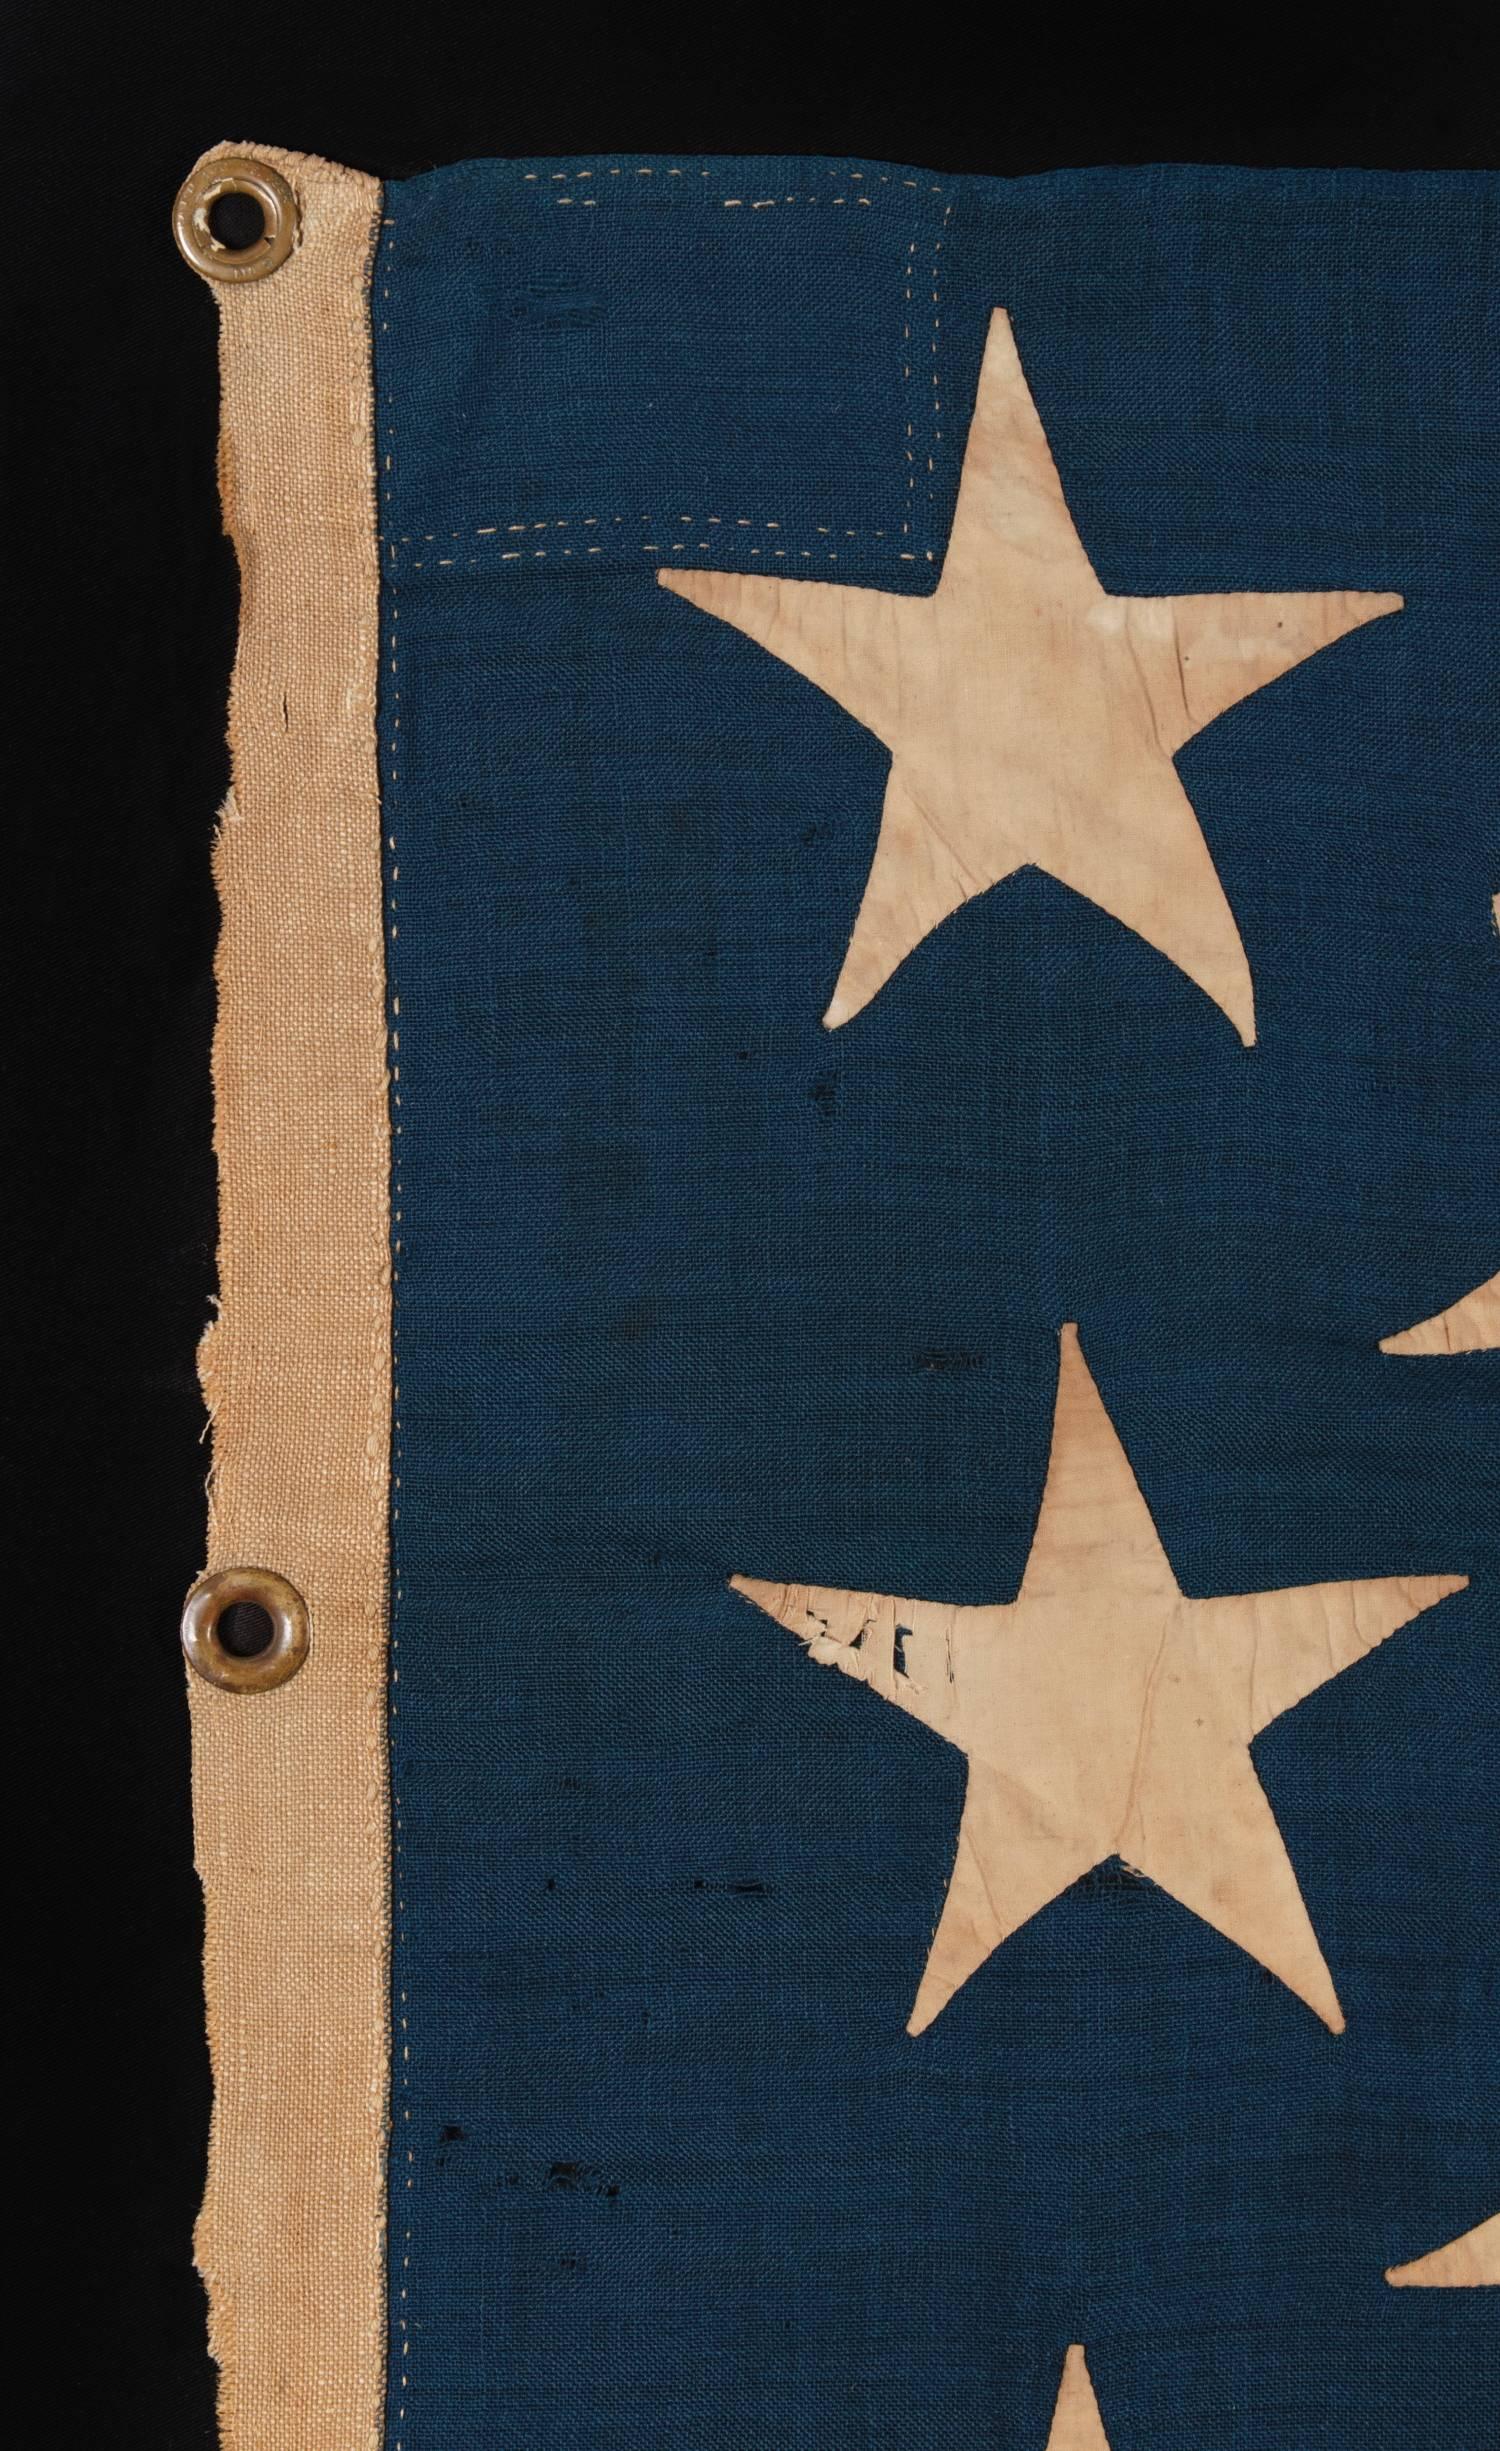 19th Century 13 Large and Strikingly Visual Stars on a U.S Navy Small Boat Ensign Flag